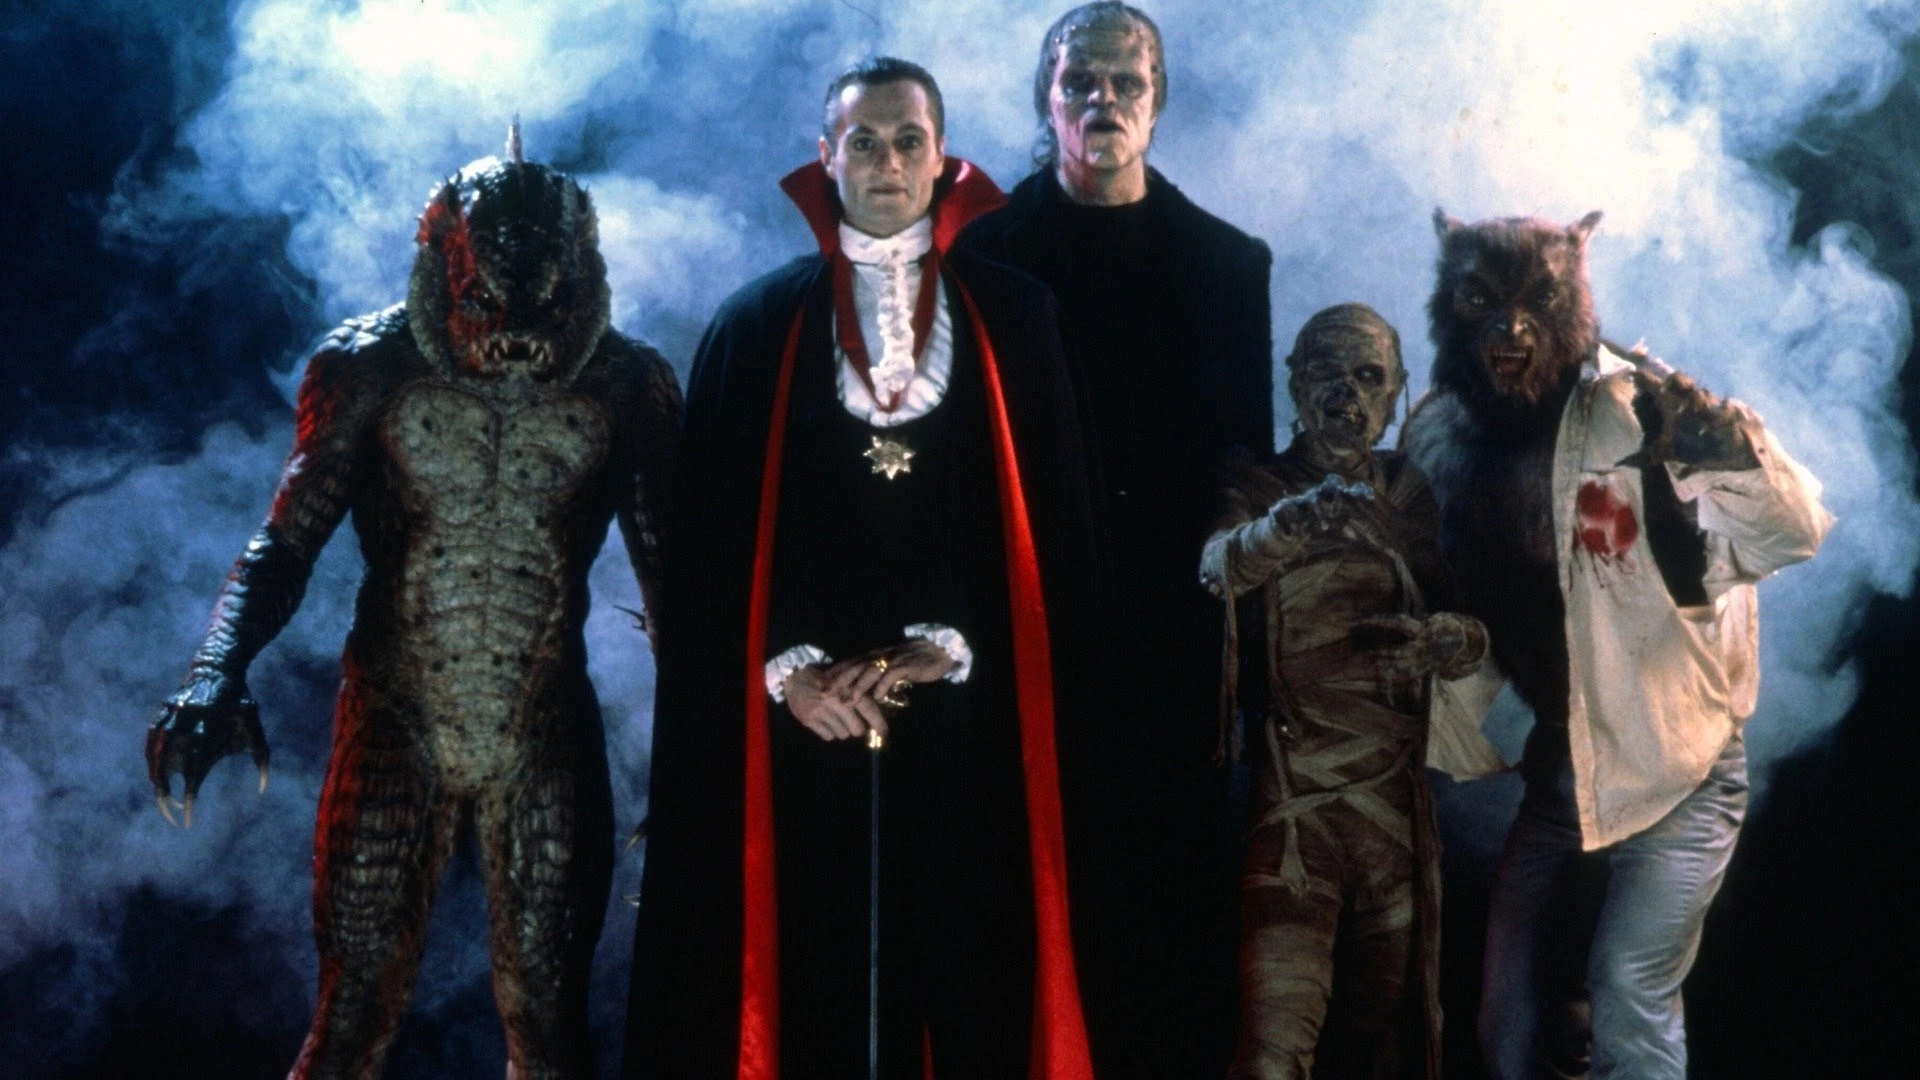 The Monster Squad (1987) - Movies like the Goonies